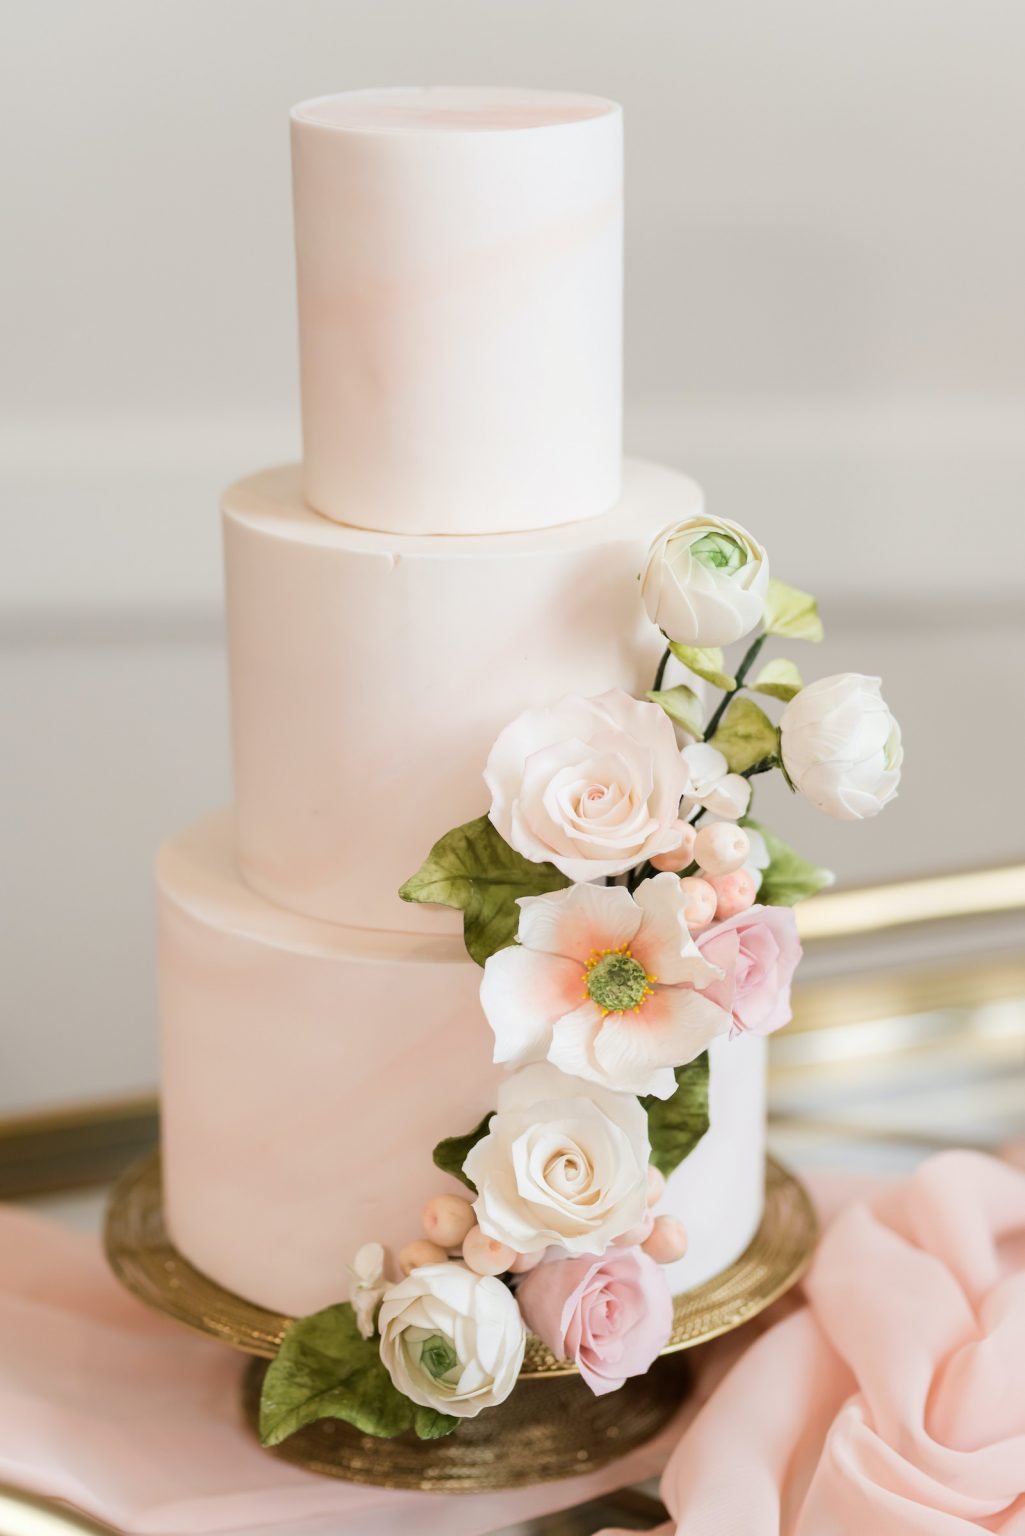 How much is a three tier wedding cake?